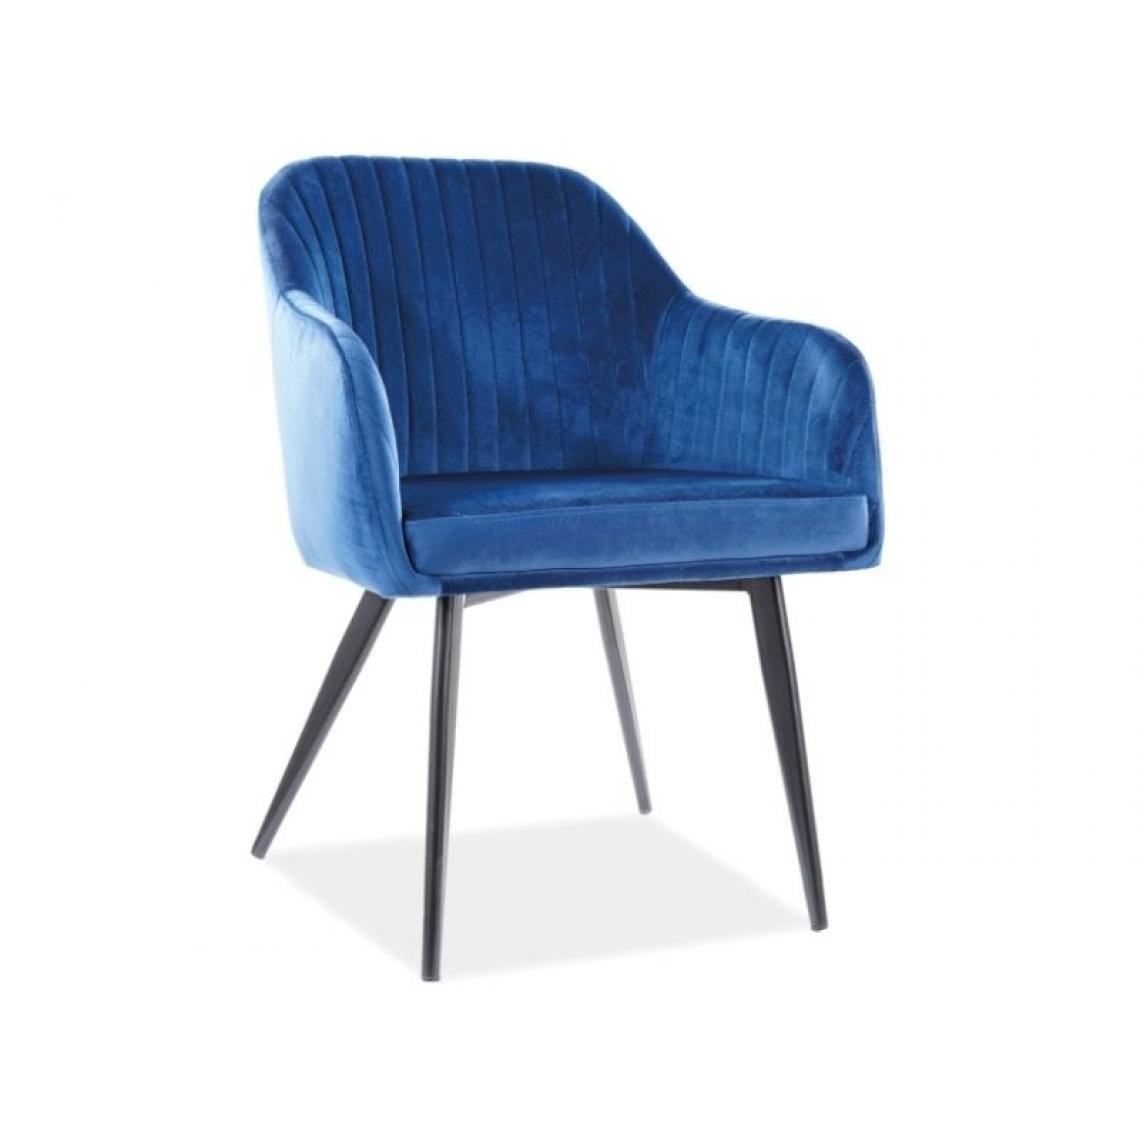 Signal - CHAISE ELINA VELOURS NOIR STELAGE / NAVY TAP 91 - Chaises